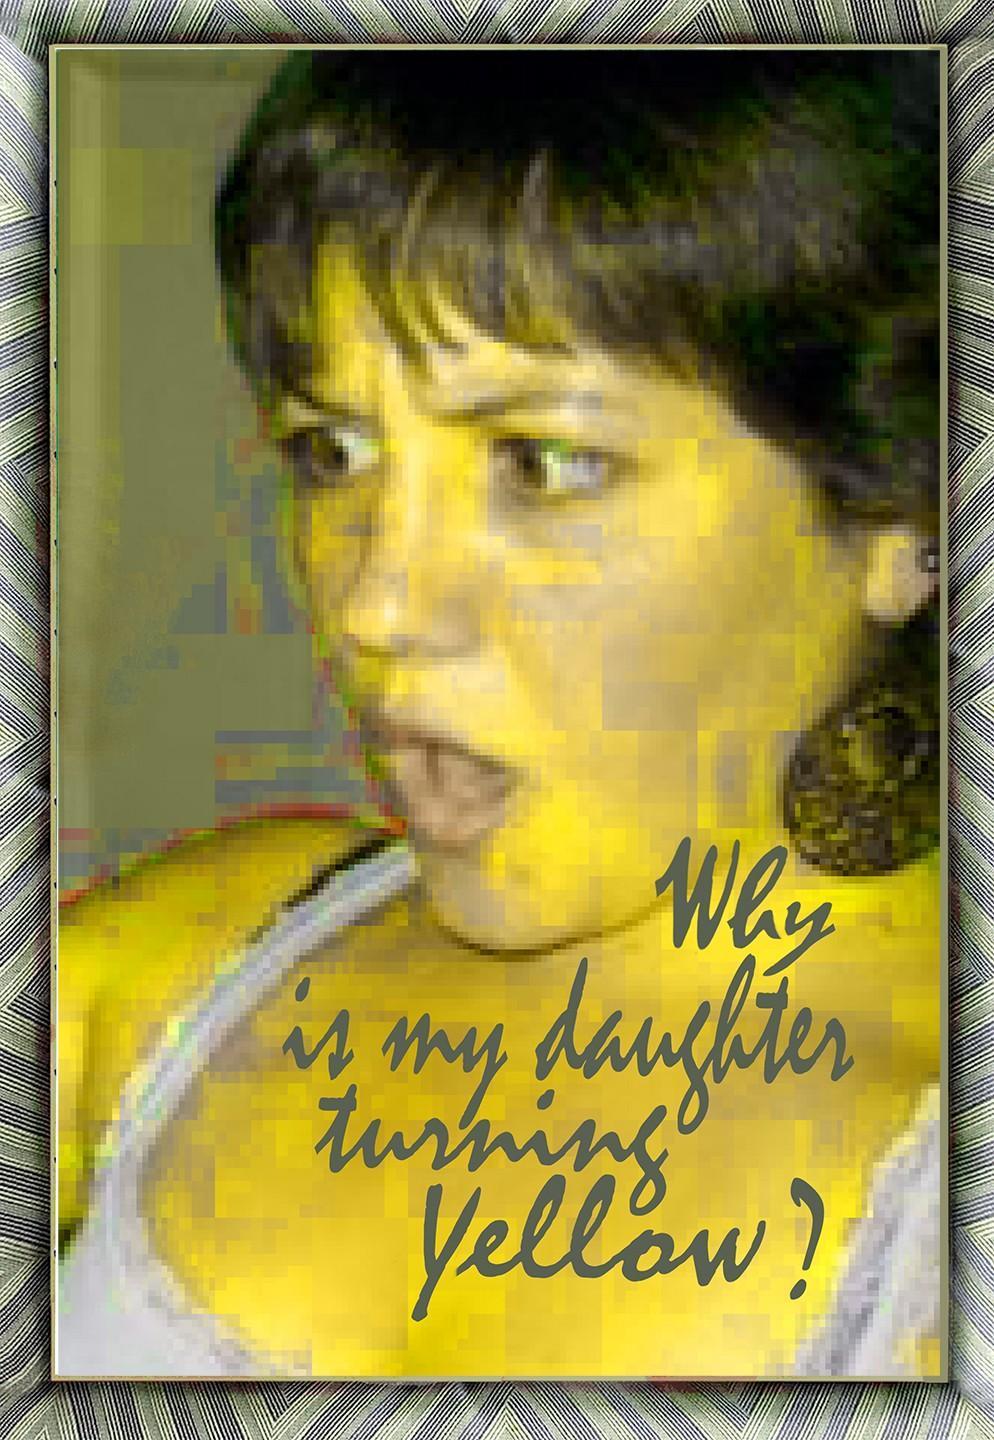 Robin Botie of Ithaca, New York asks, Why is my daughter turning yellow?"